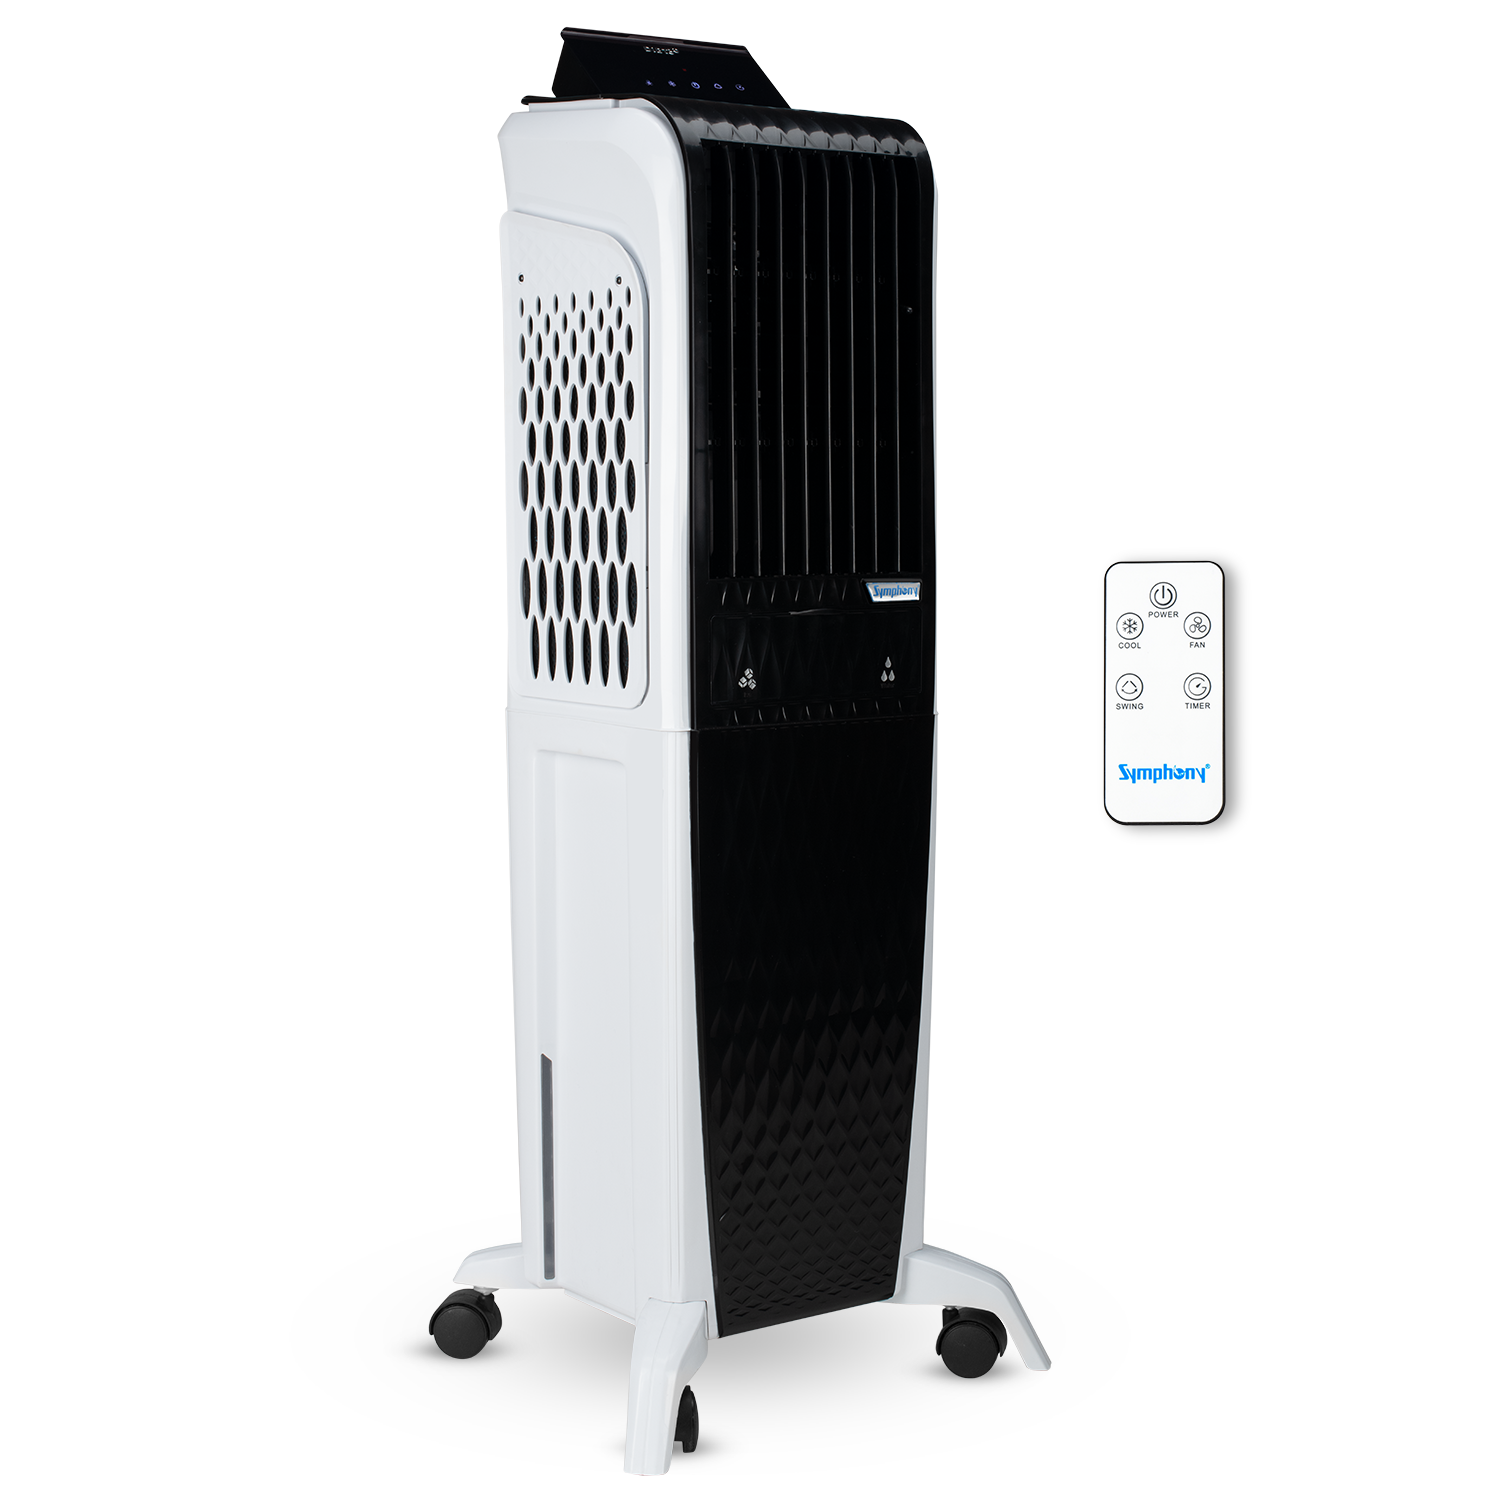 Image of a Symphony Diet 3D 20i Tower Air Cooler on a white background